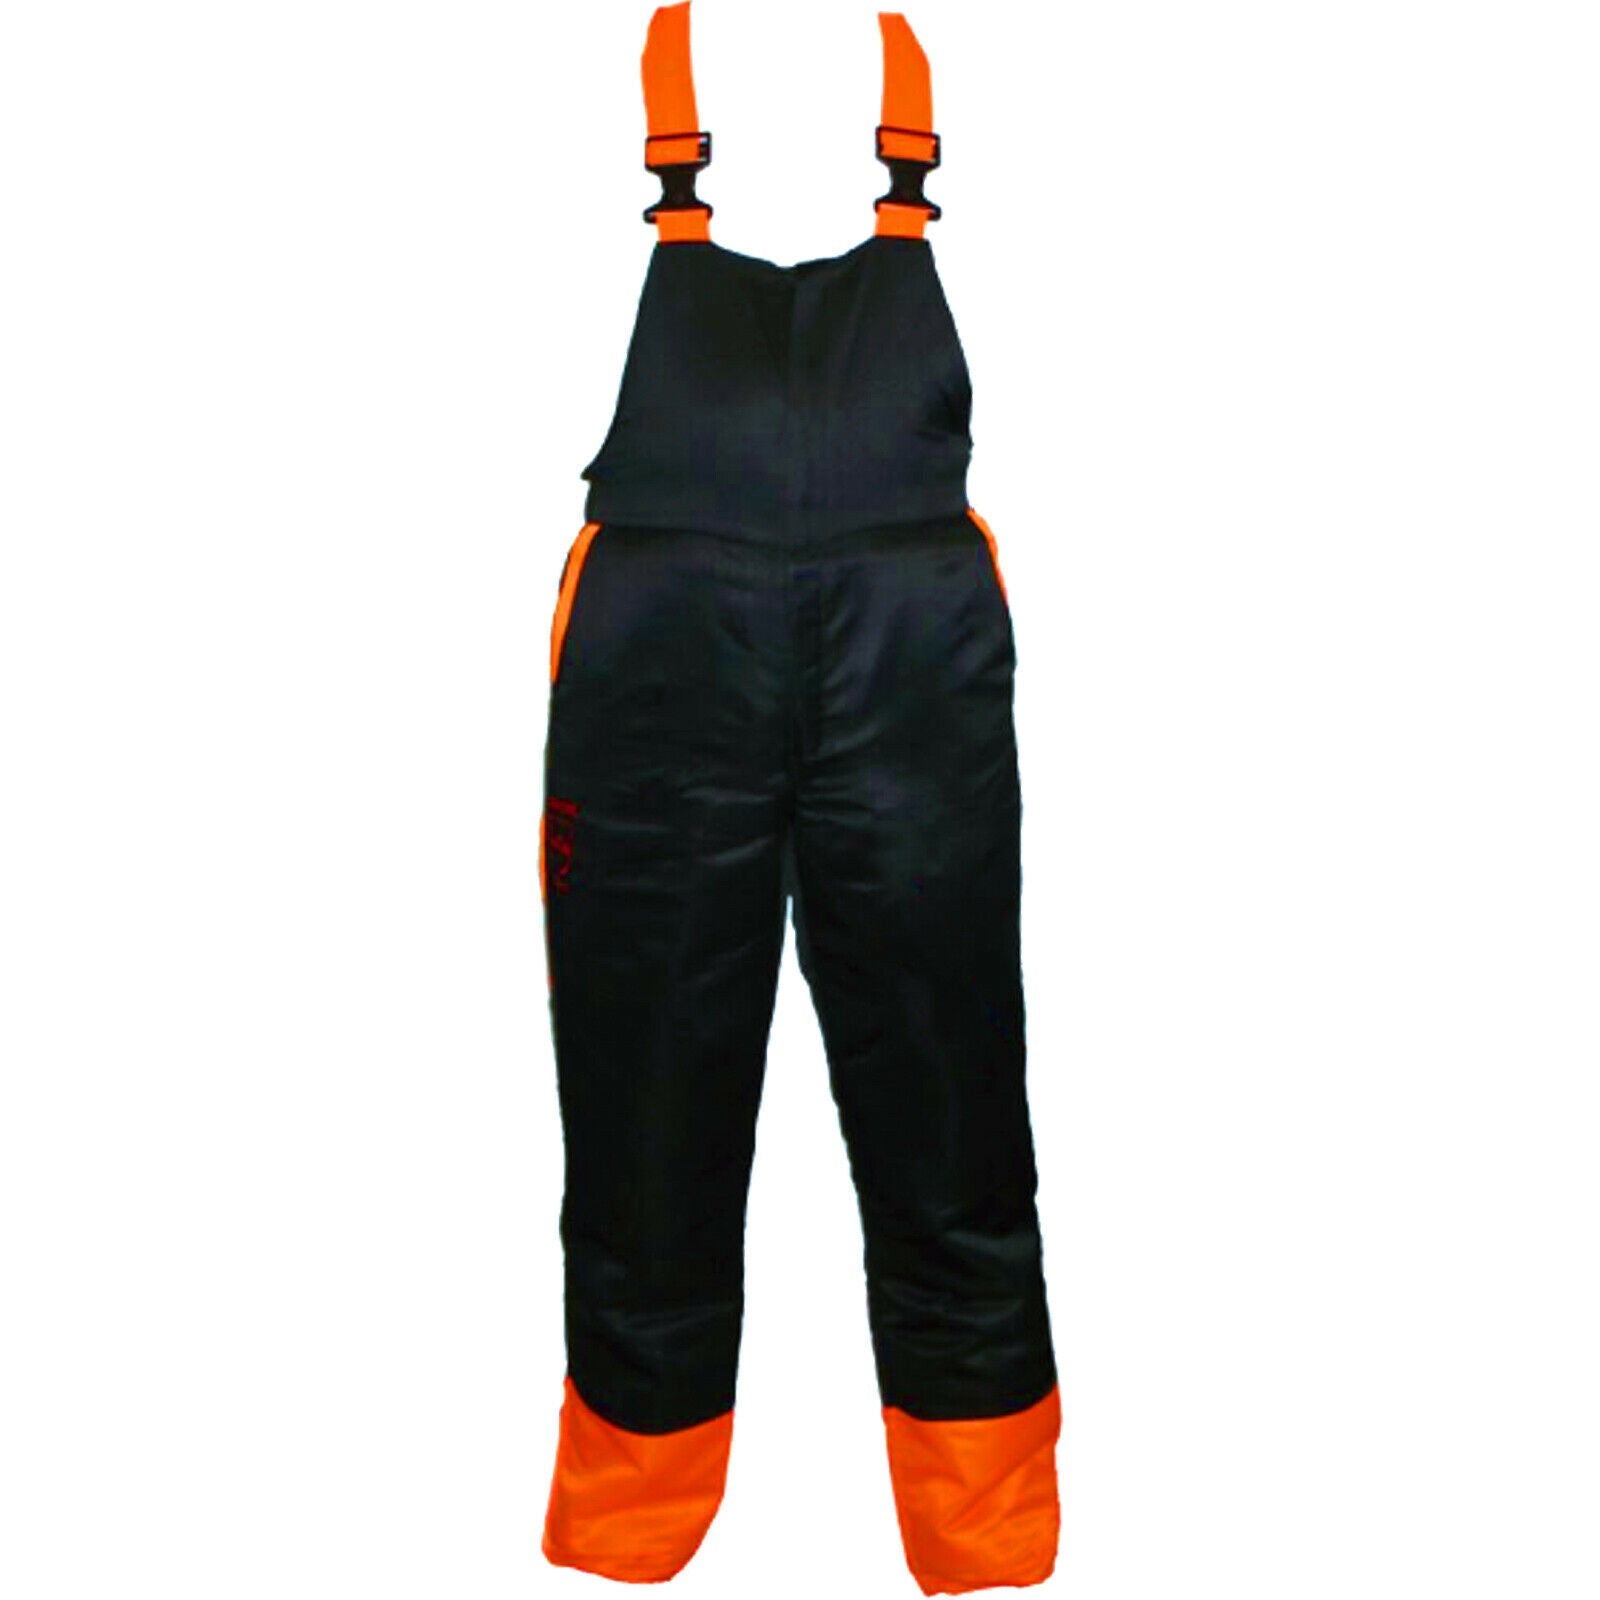 Chainsaw Bib Brace Trousers Dungarees Protective Large 34/38 + Safety Goggles